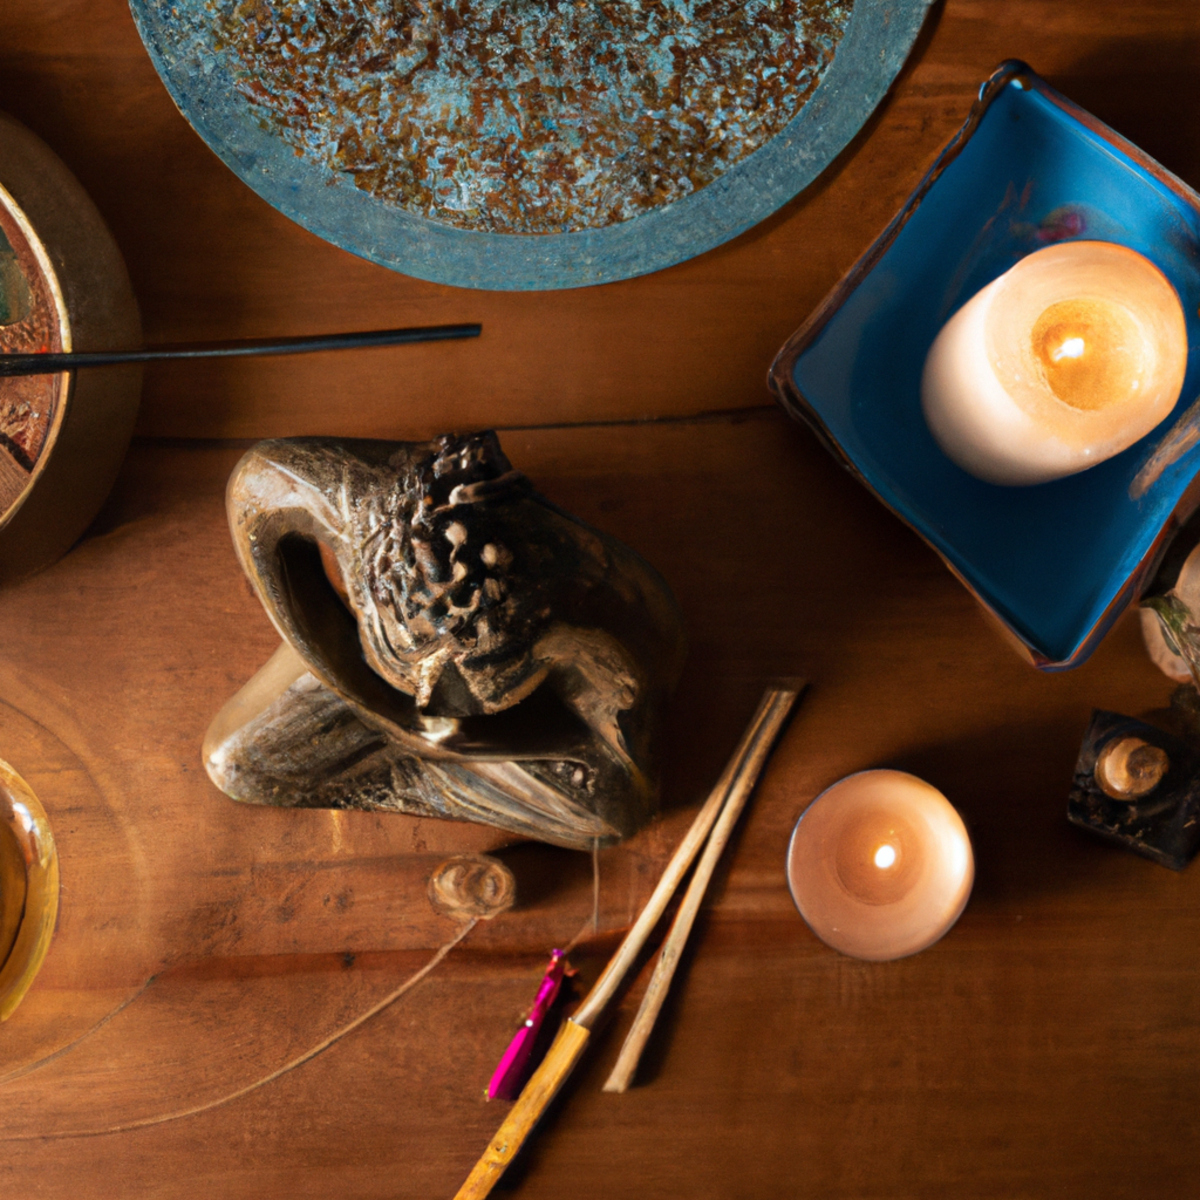 The photo features a serene scene of a wooden table with various meditation objects placed on it. In the center of the frame, there is a small Buddha statue, surrounded by a few candles and incense sticks. On the left side of the table, there is a cushion for sitting, and on the right side, there is a small bowl filled with smooth stones. The lighting is soft and warm, creating a peaceful atmosphere that invites the viewer to take a moment to breathe and relax.